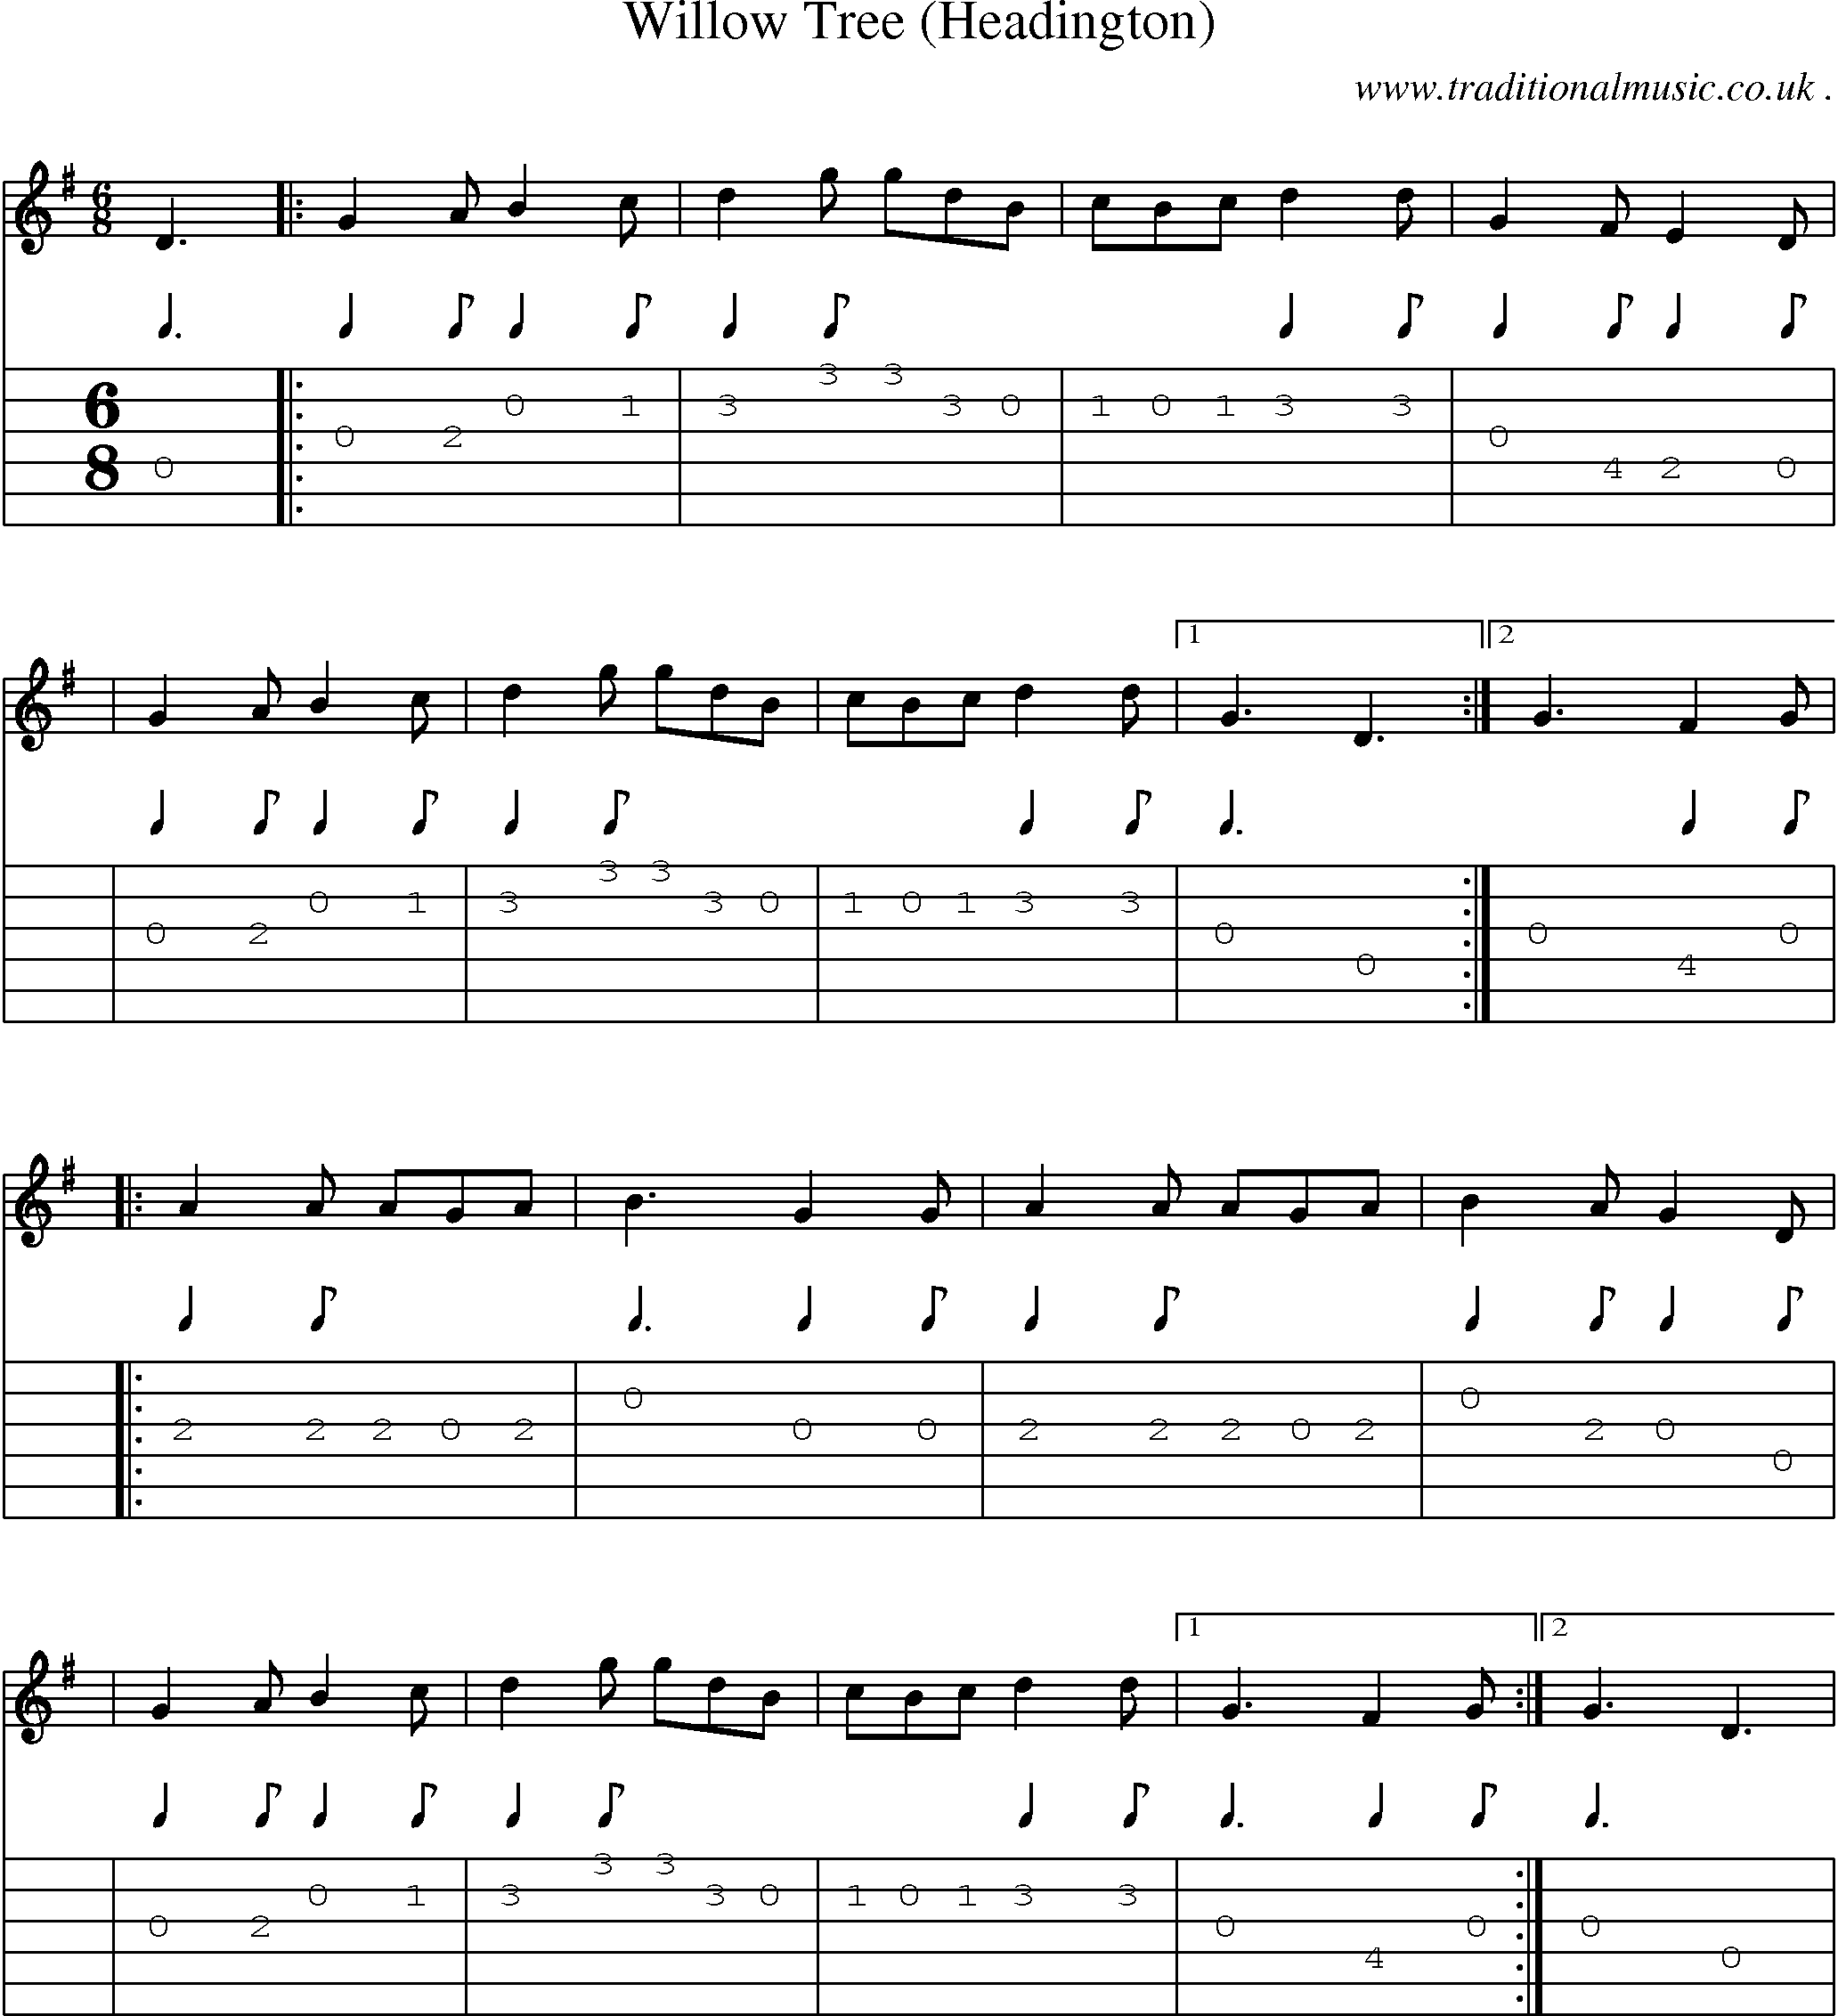 Sheet-Music and Guitar Tabs for Willow Tree (headington)